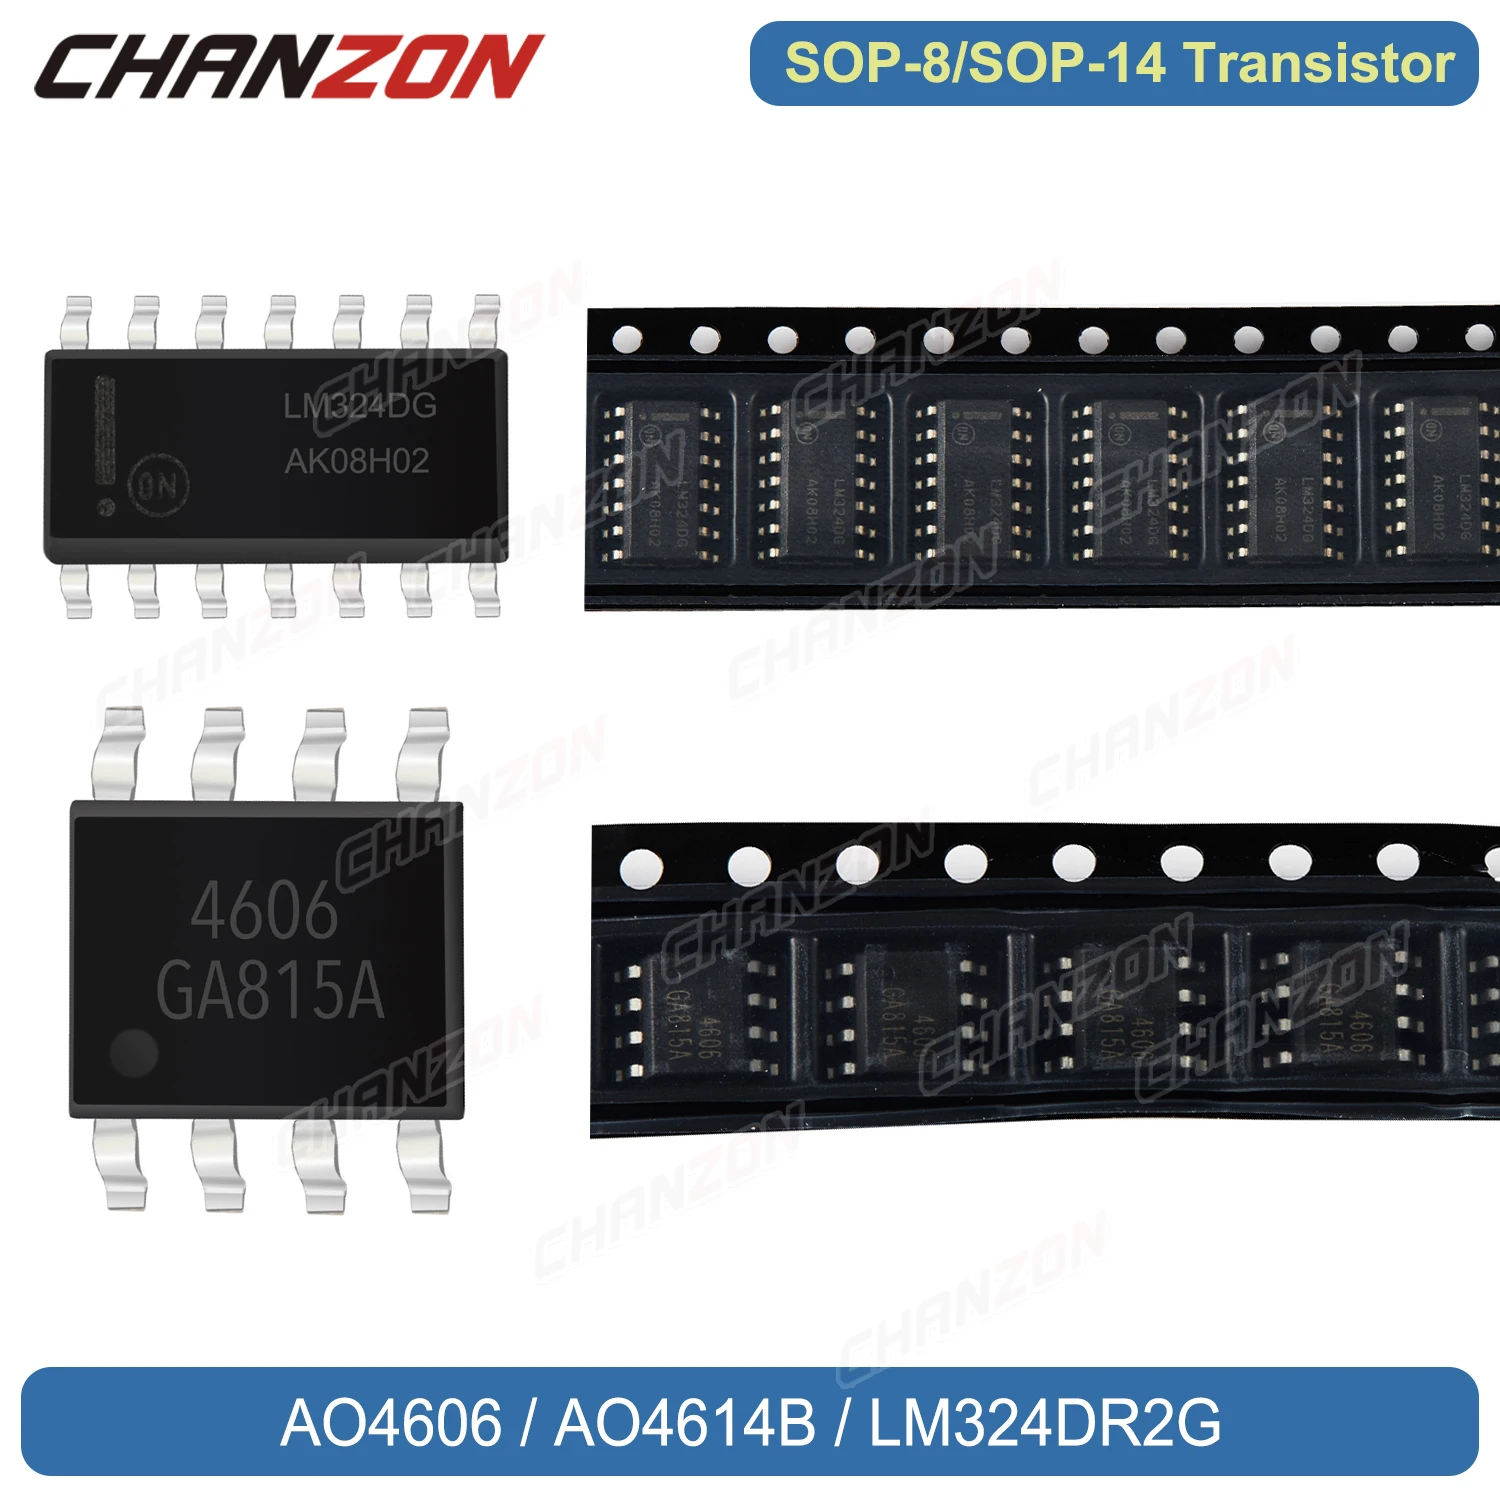 

SOP-8 AO4606 AO4614B AO4614 Complementary Trench MOSFET SOP-14 LM324DR2G Quad Operational Amplifier Transistor Bipolar Junction